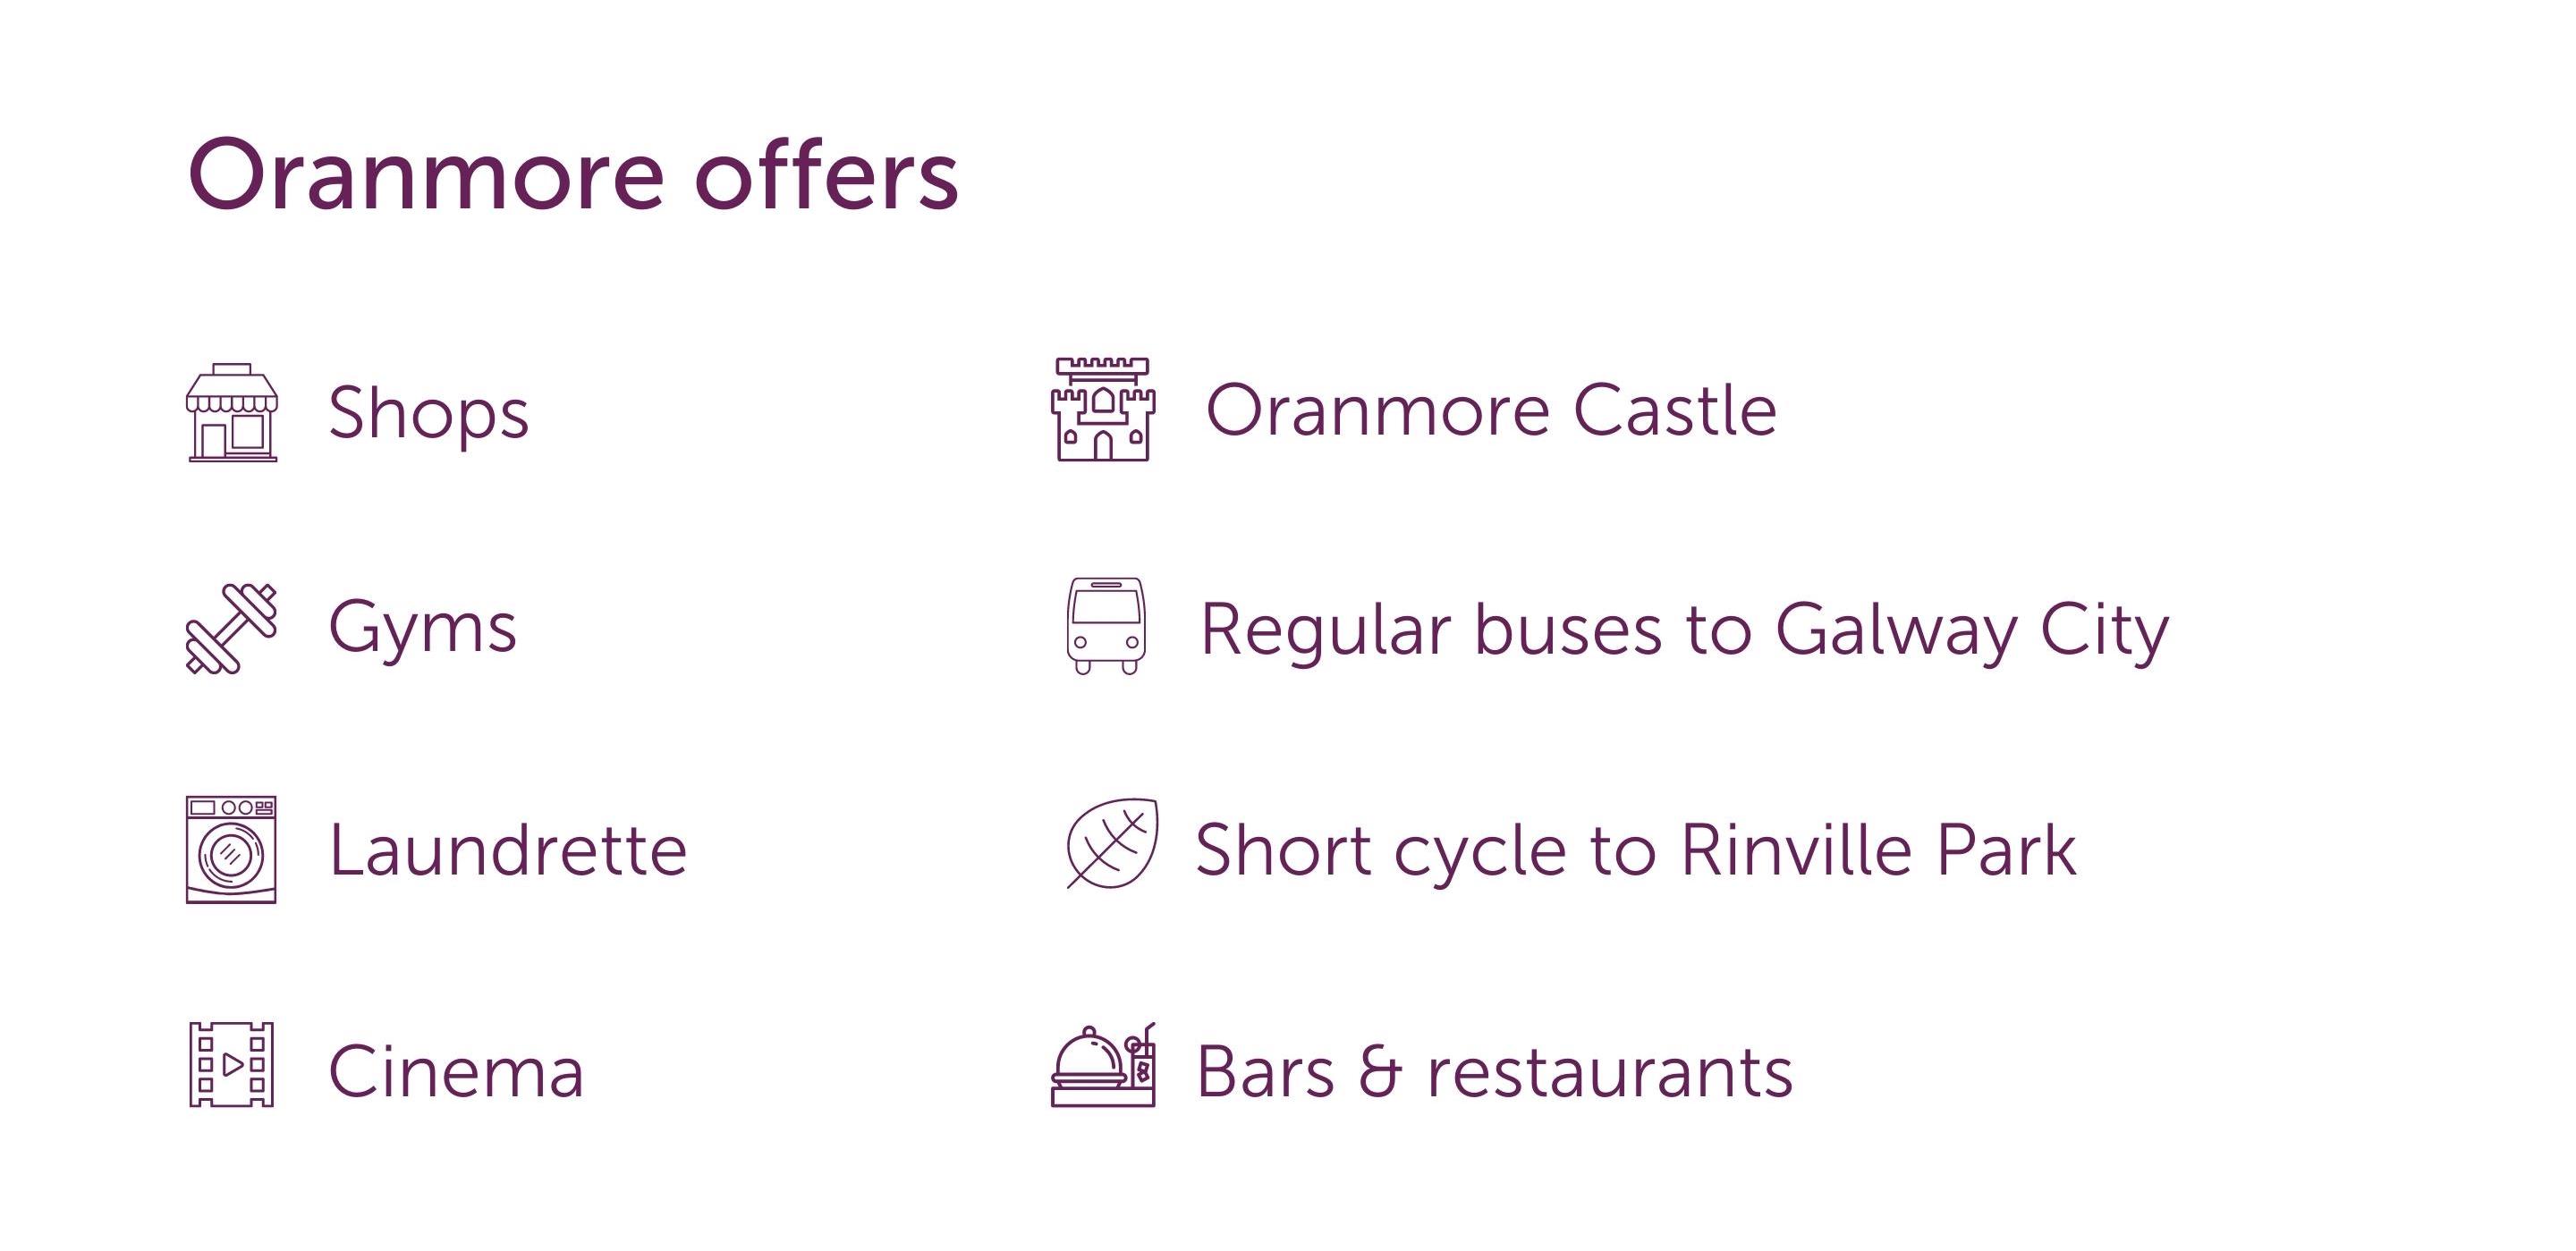 Oranmore offers